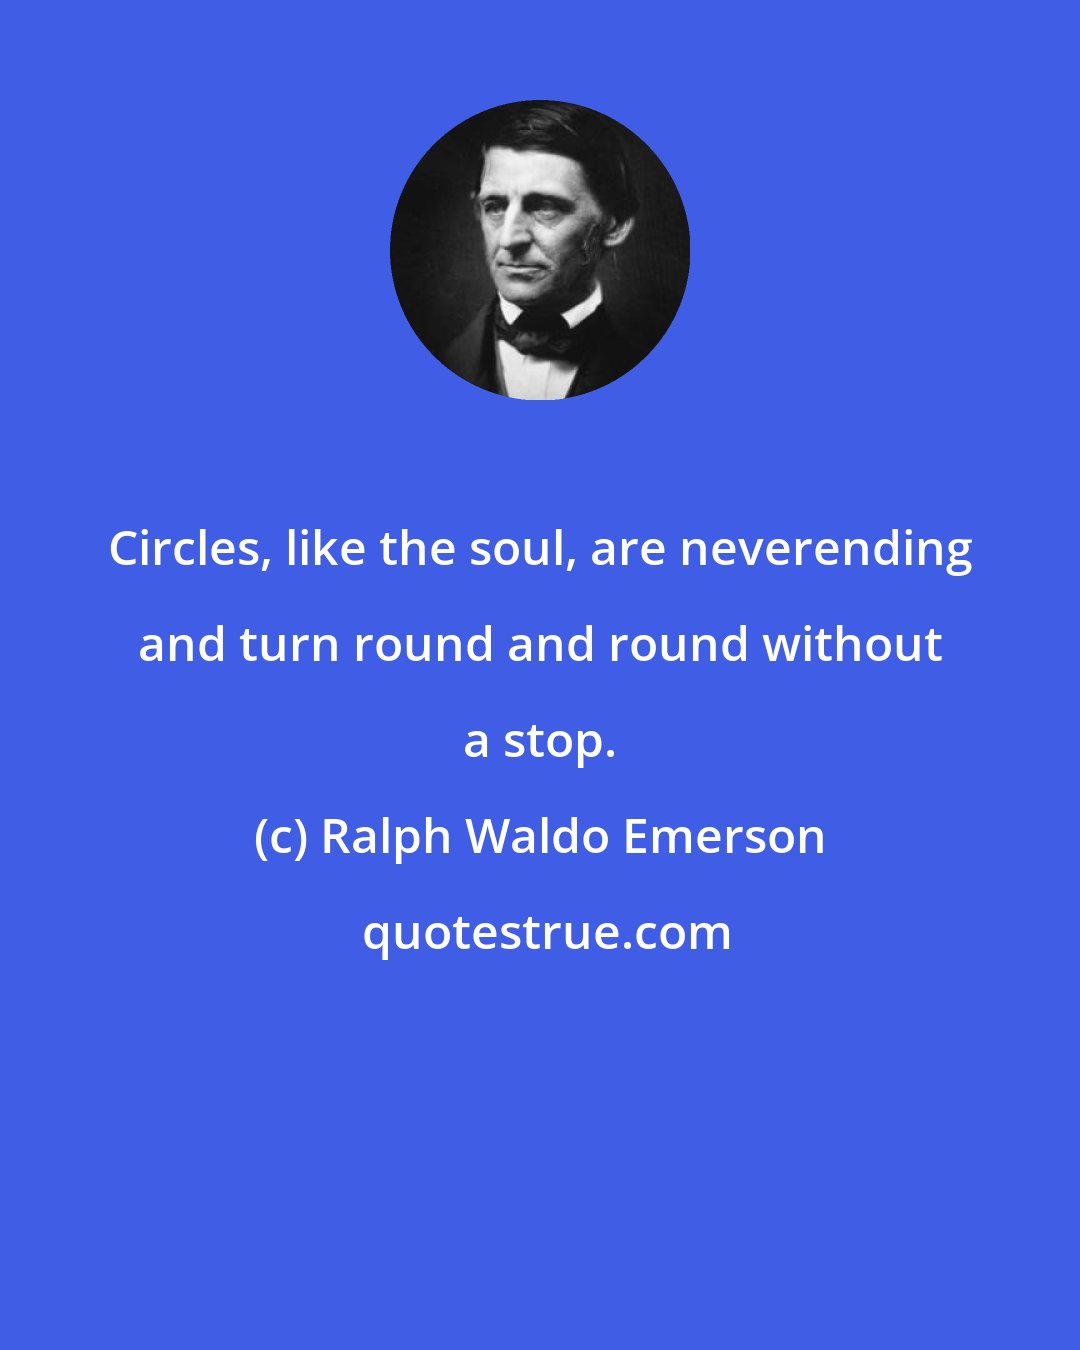 Ralph Waldo Emerson: Circles, like the soul, are neverending and turn round and round without a stop.